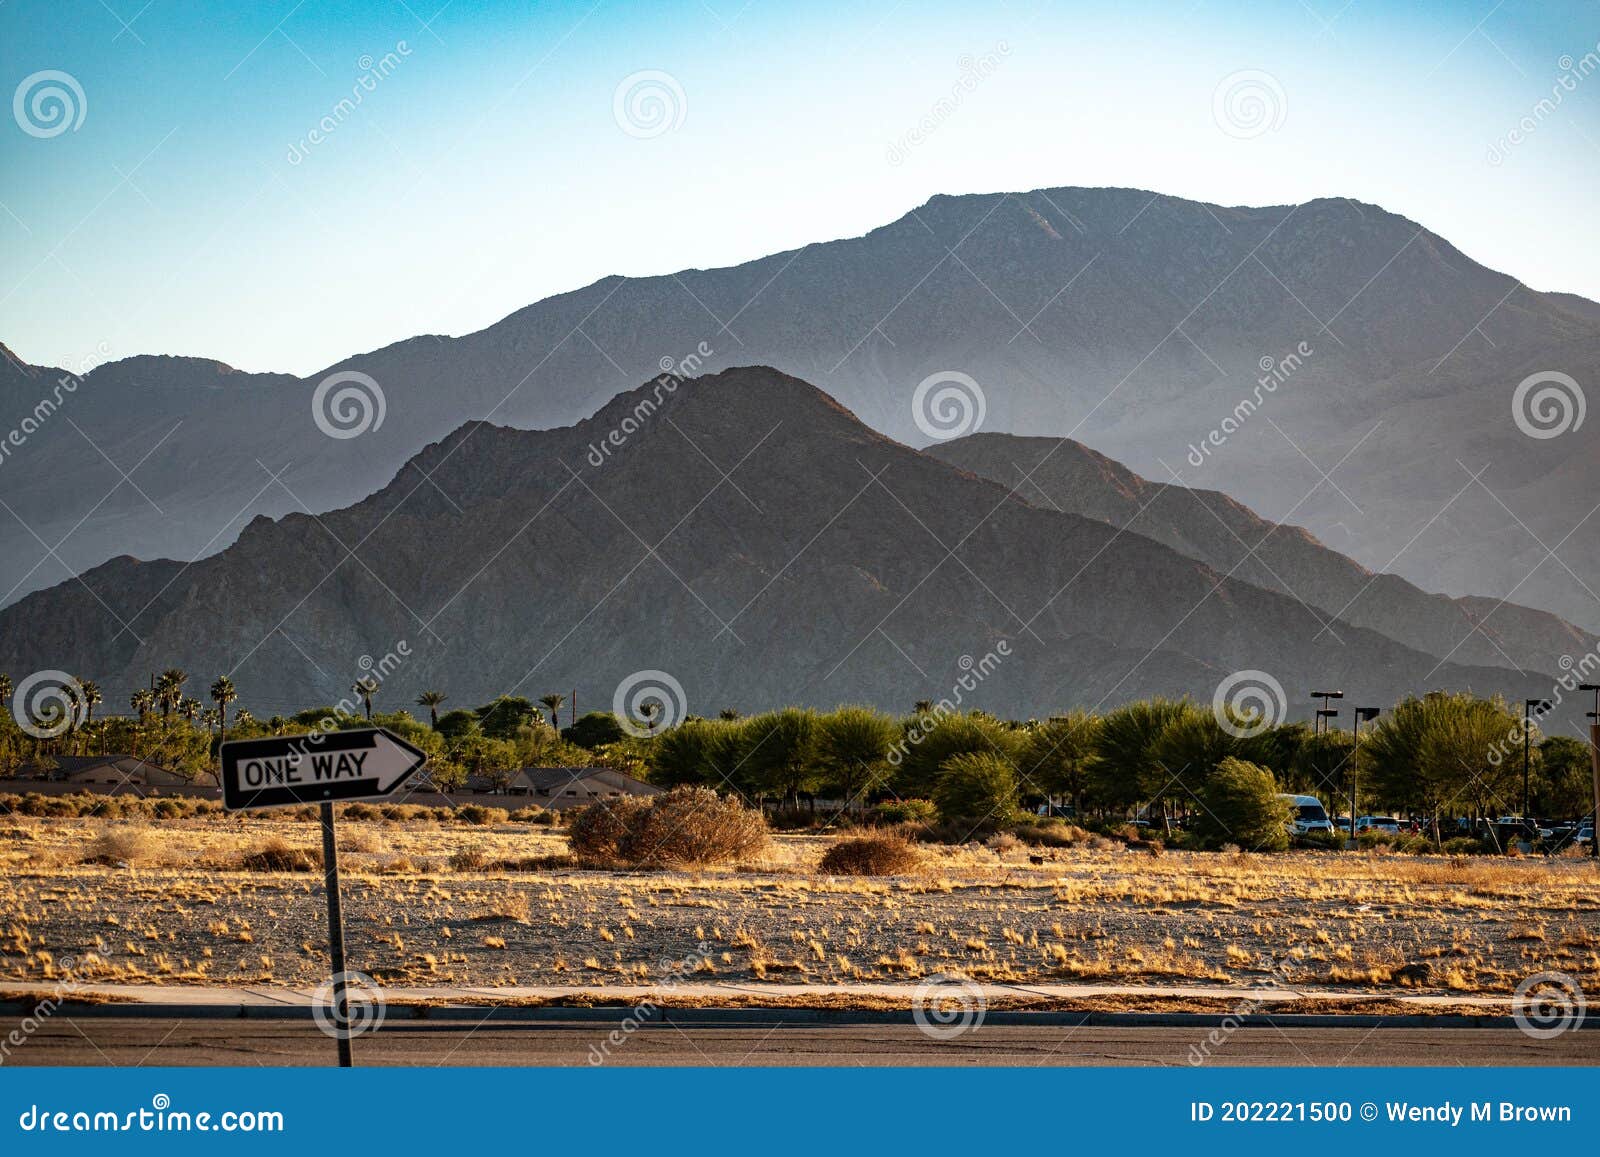 a one way sign by the side of the road in indio, california at sunset